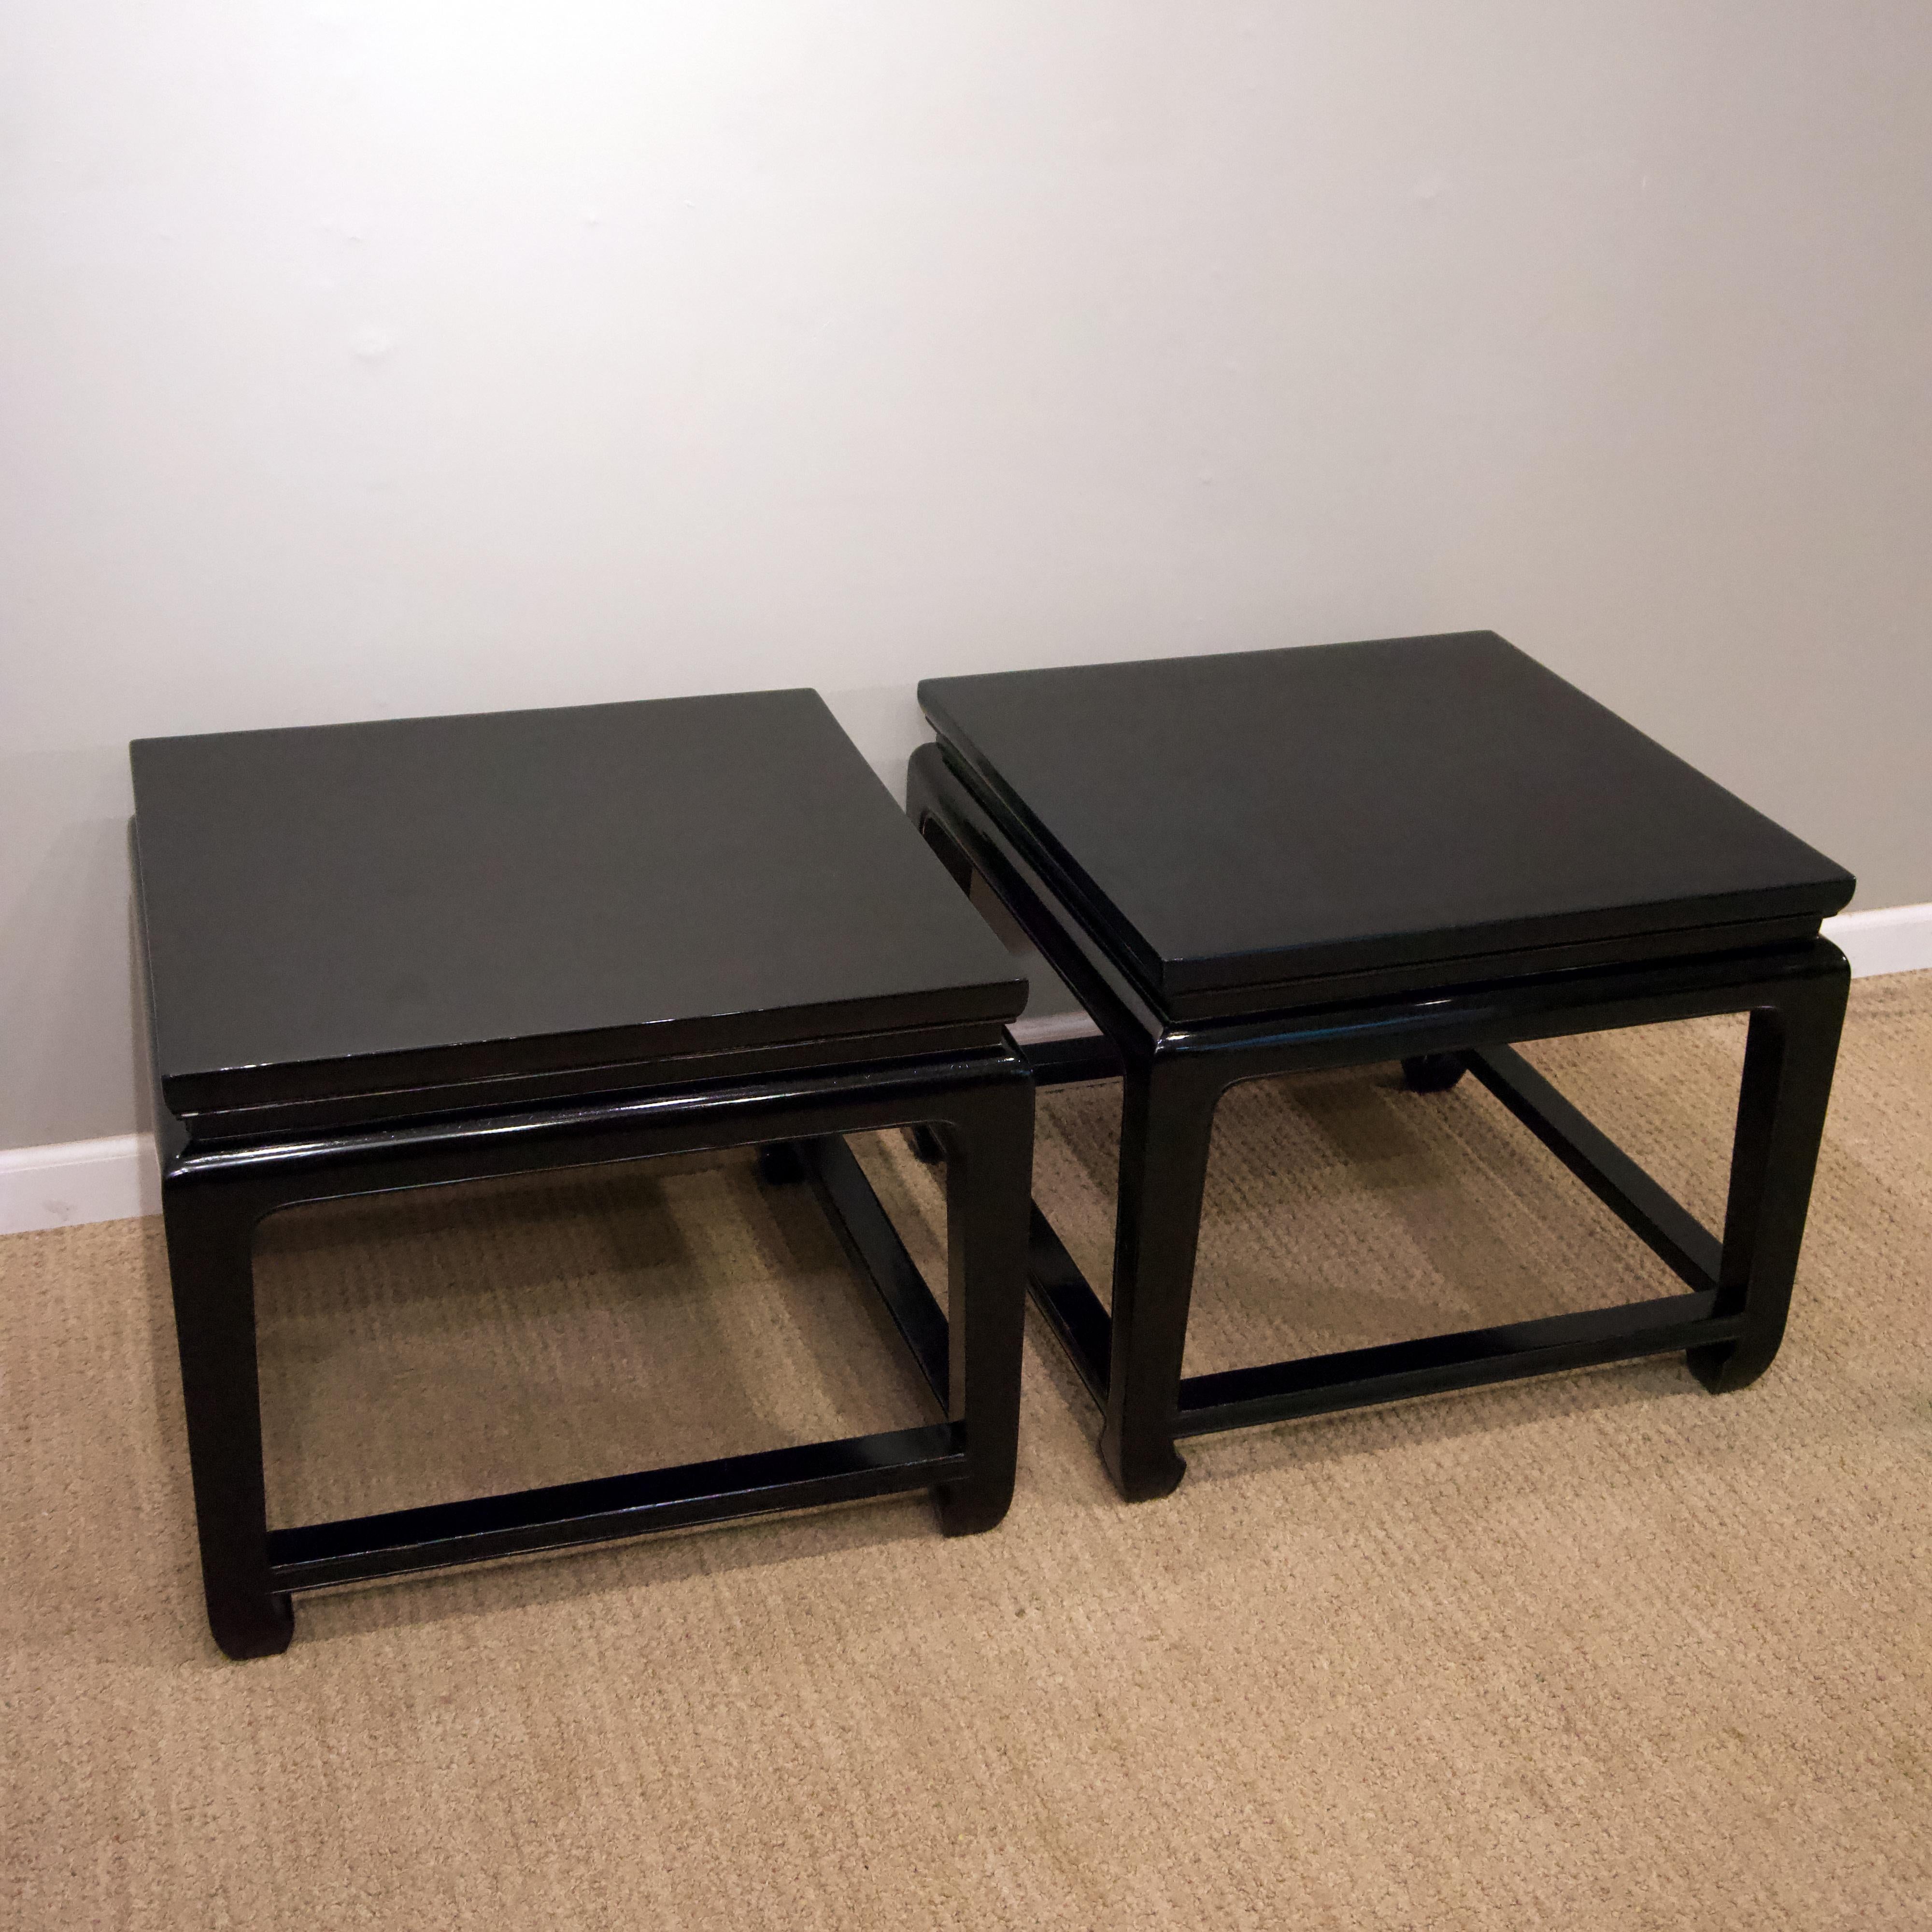 2 tables can be used as a pair of side table or together as a coffee table / low table.
Hardwood construction with applied ebonized finish.